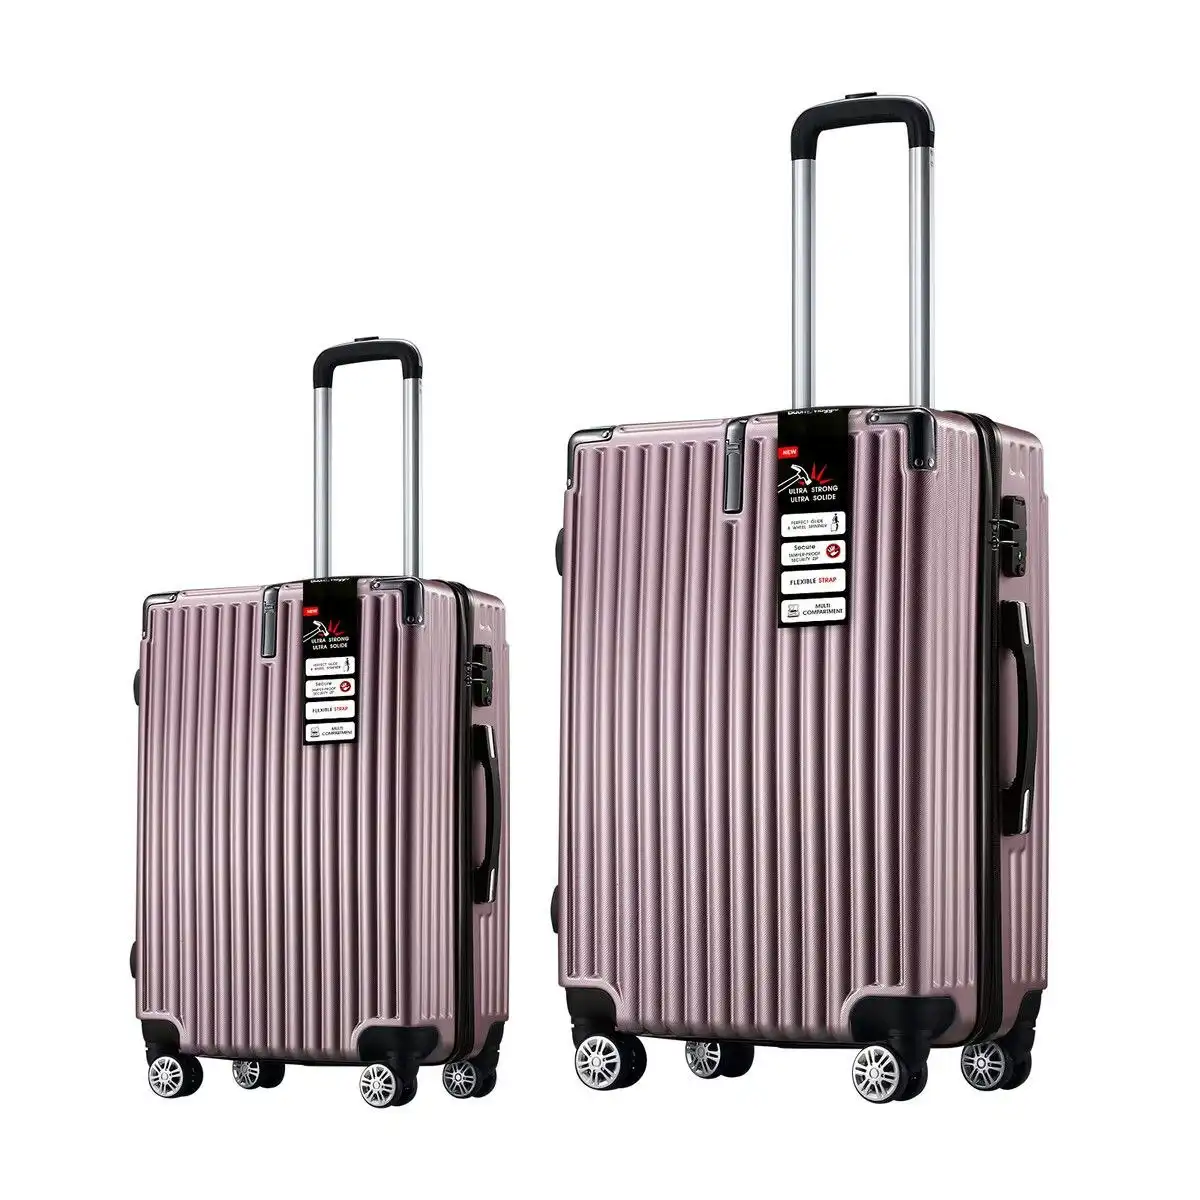 Buon Viaggio 2 Piece Luggage Suitcase Set Carry On Spinner Case Traveller Bag Storage Cabin Lightweight Hard Shell Trolley Wheels TSA Lock Rose Gold